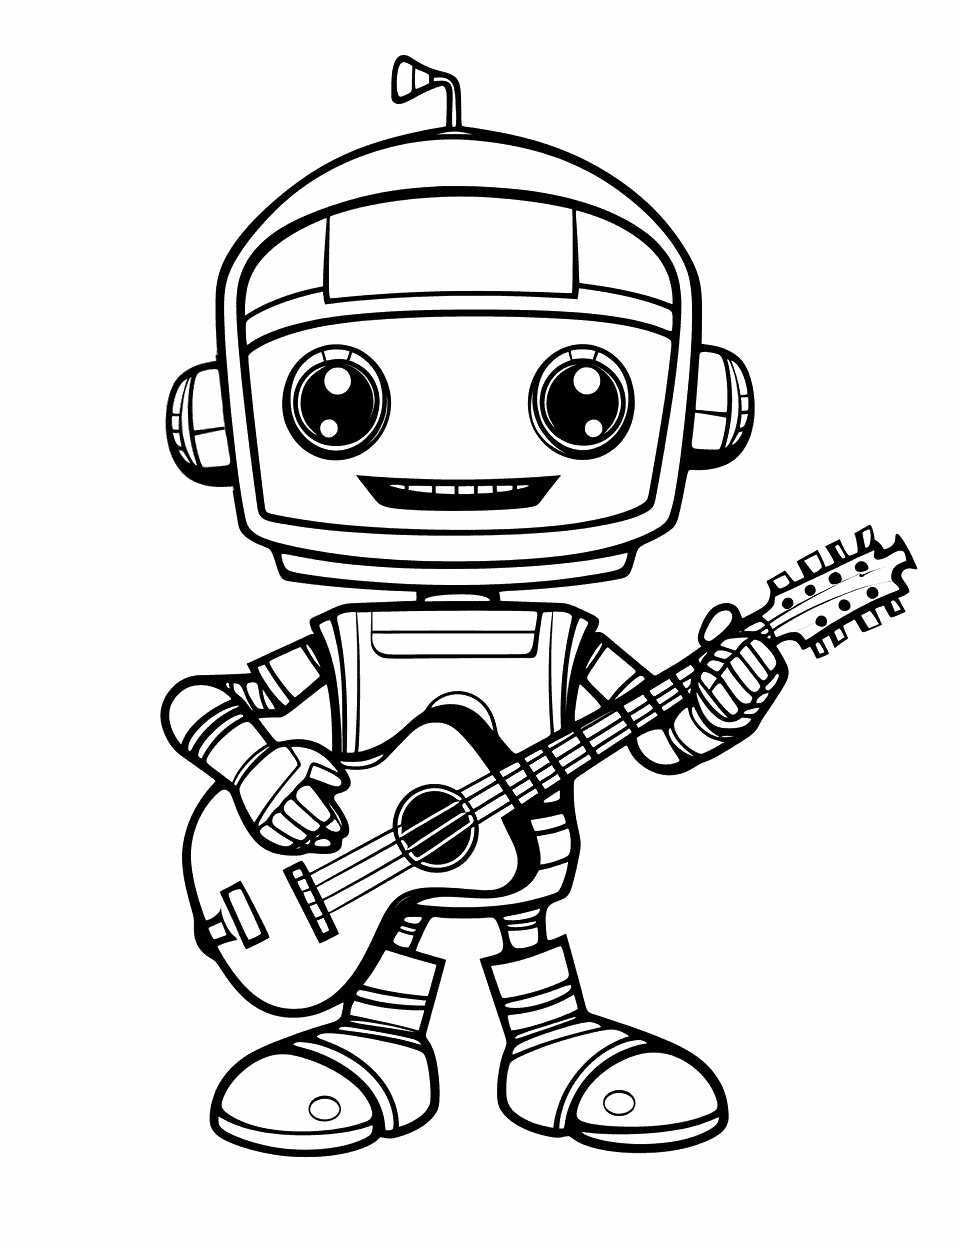 Musician Robot Playing Guitar Coloring Page - A robot strumming an acoustic guitar.